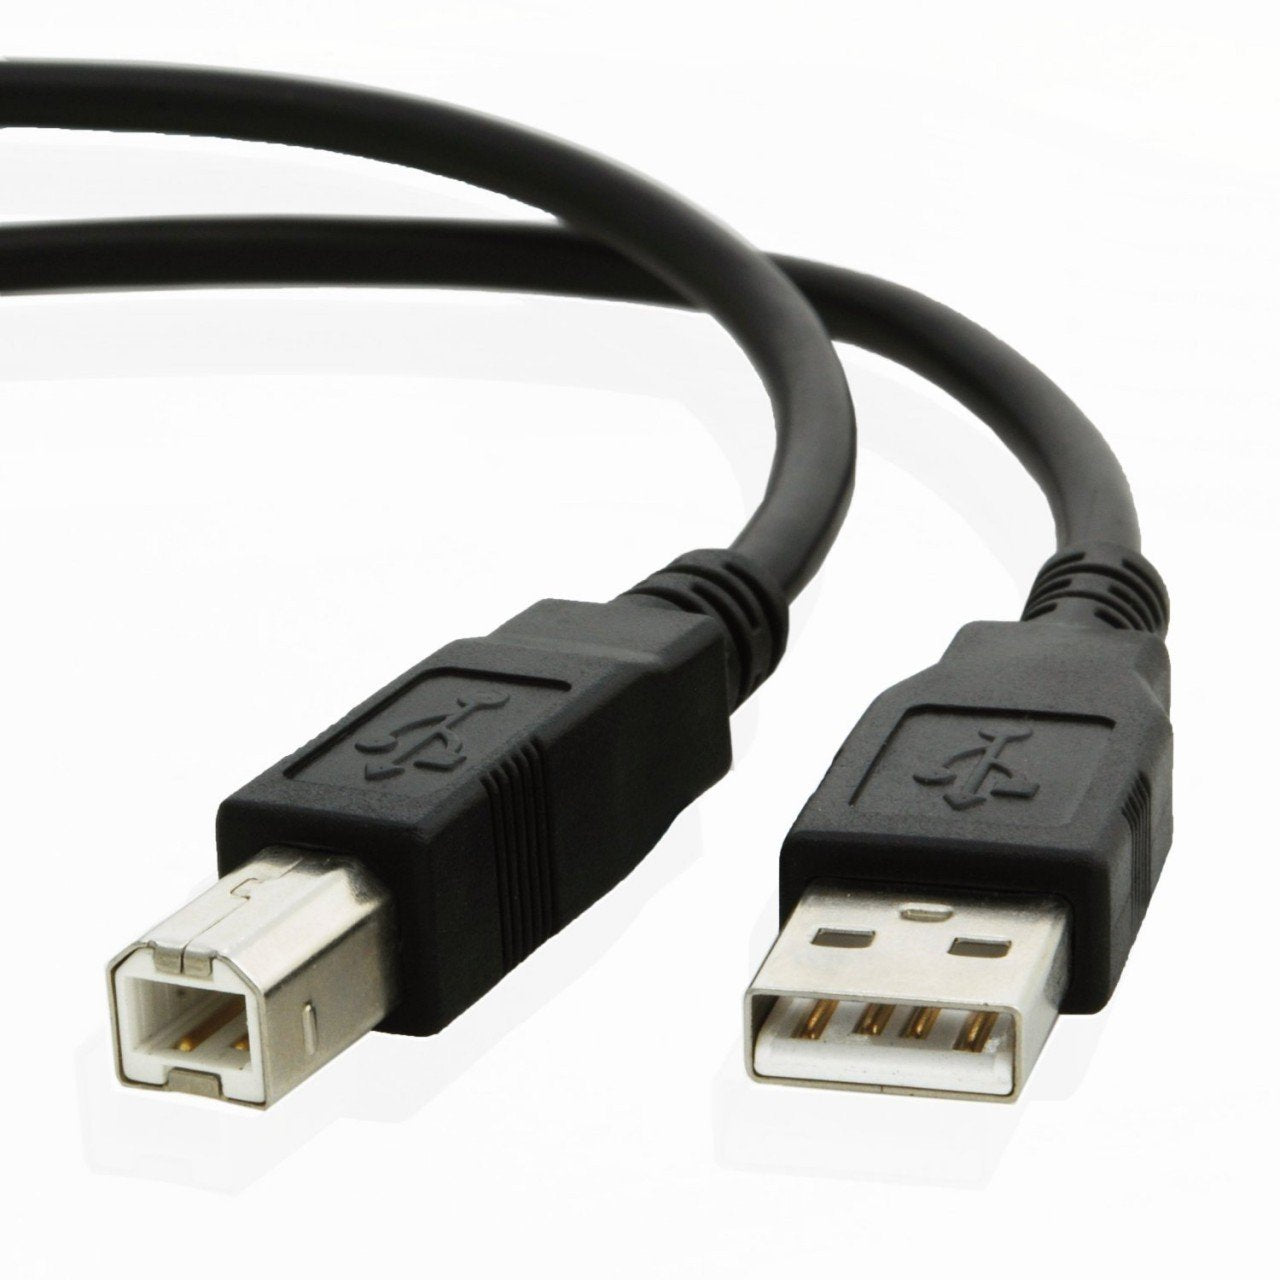 USB cable for Hp LASERJET PRO M426fdn